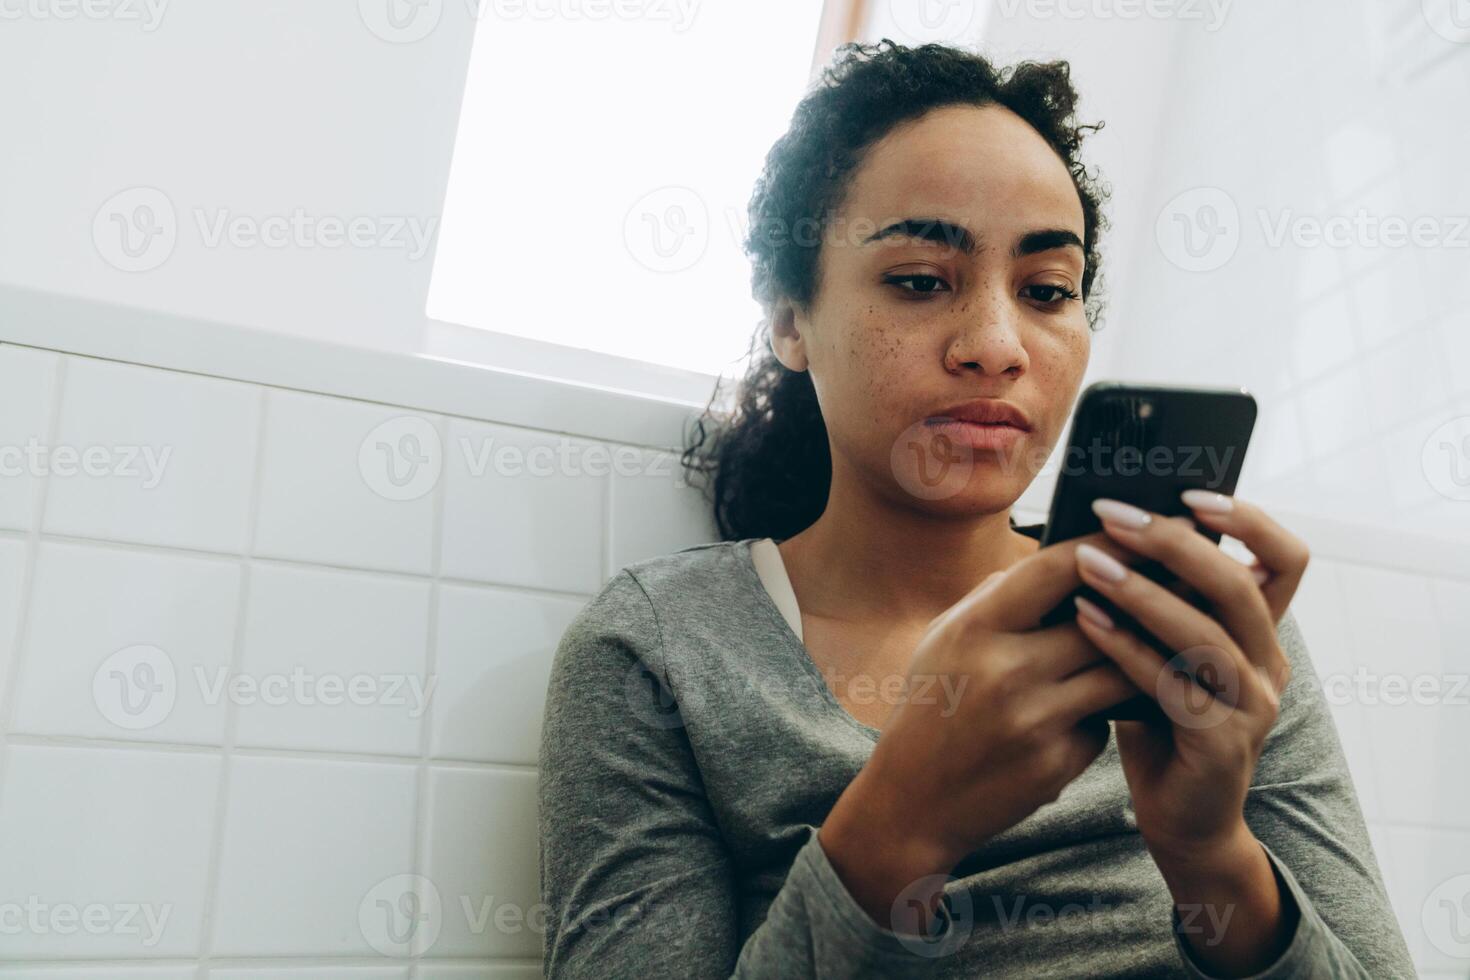 Black woman using mobile phone while standing in bathroom photo